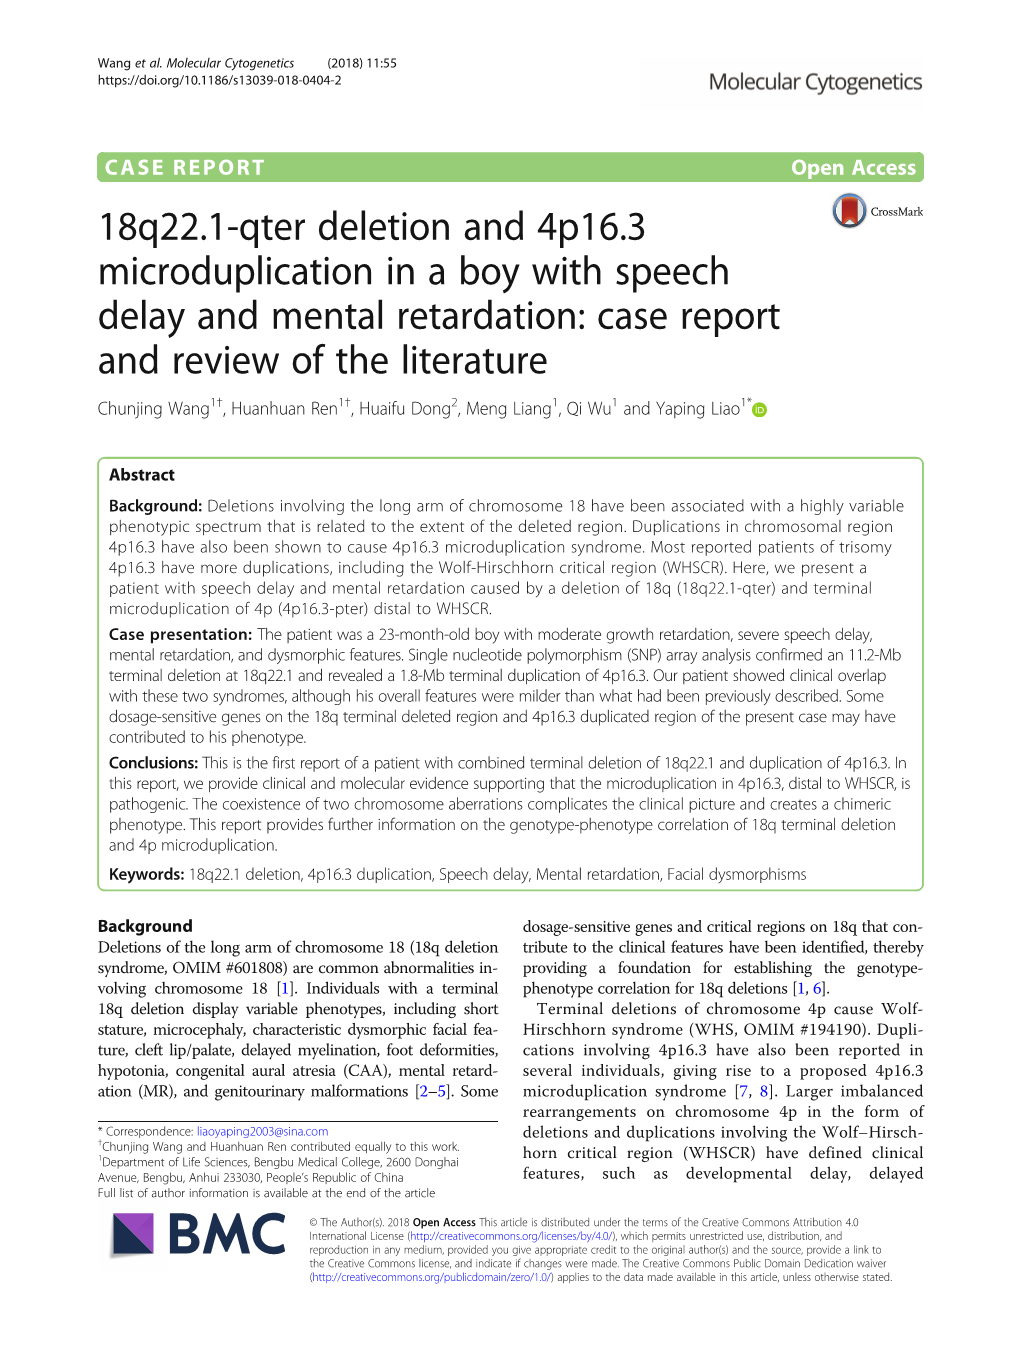 18Q22.1-Qter Deletion and 4P16.3 Microduplication in a Boy With